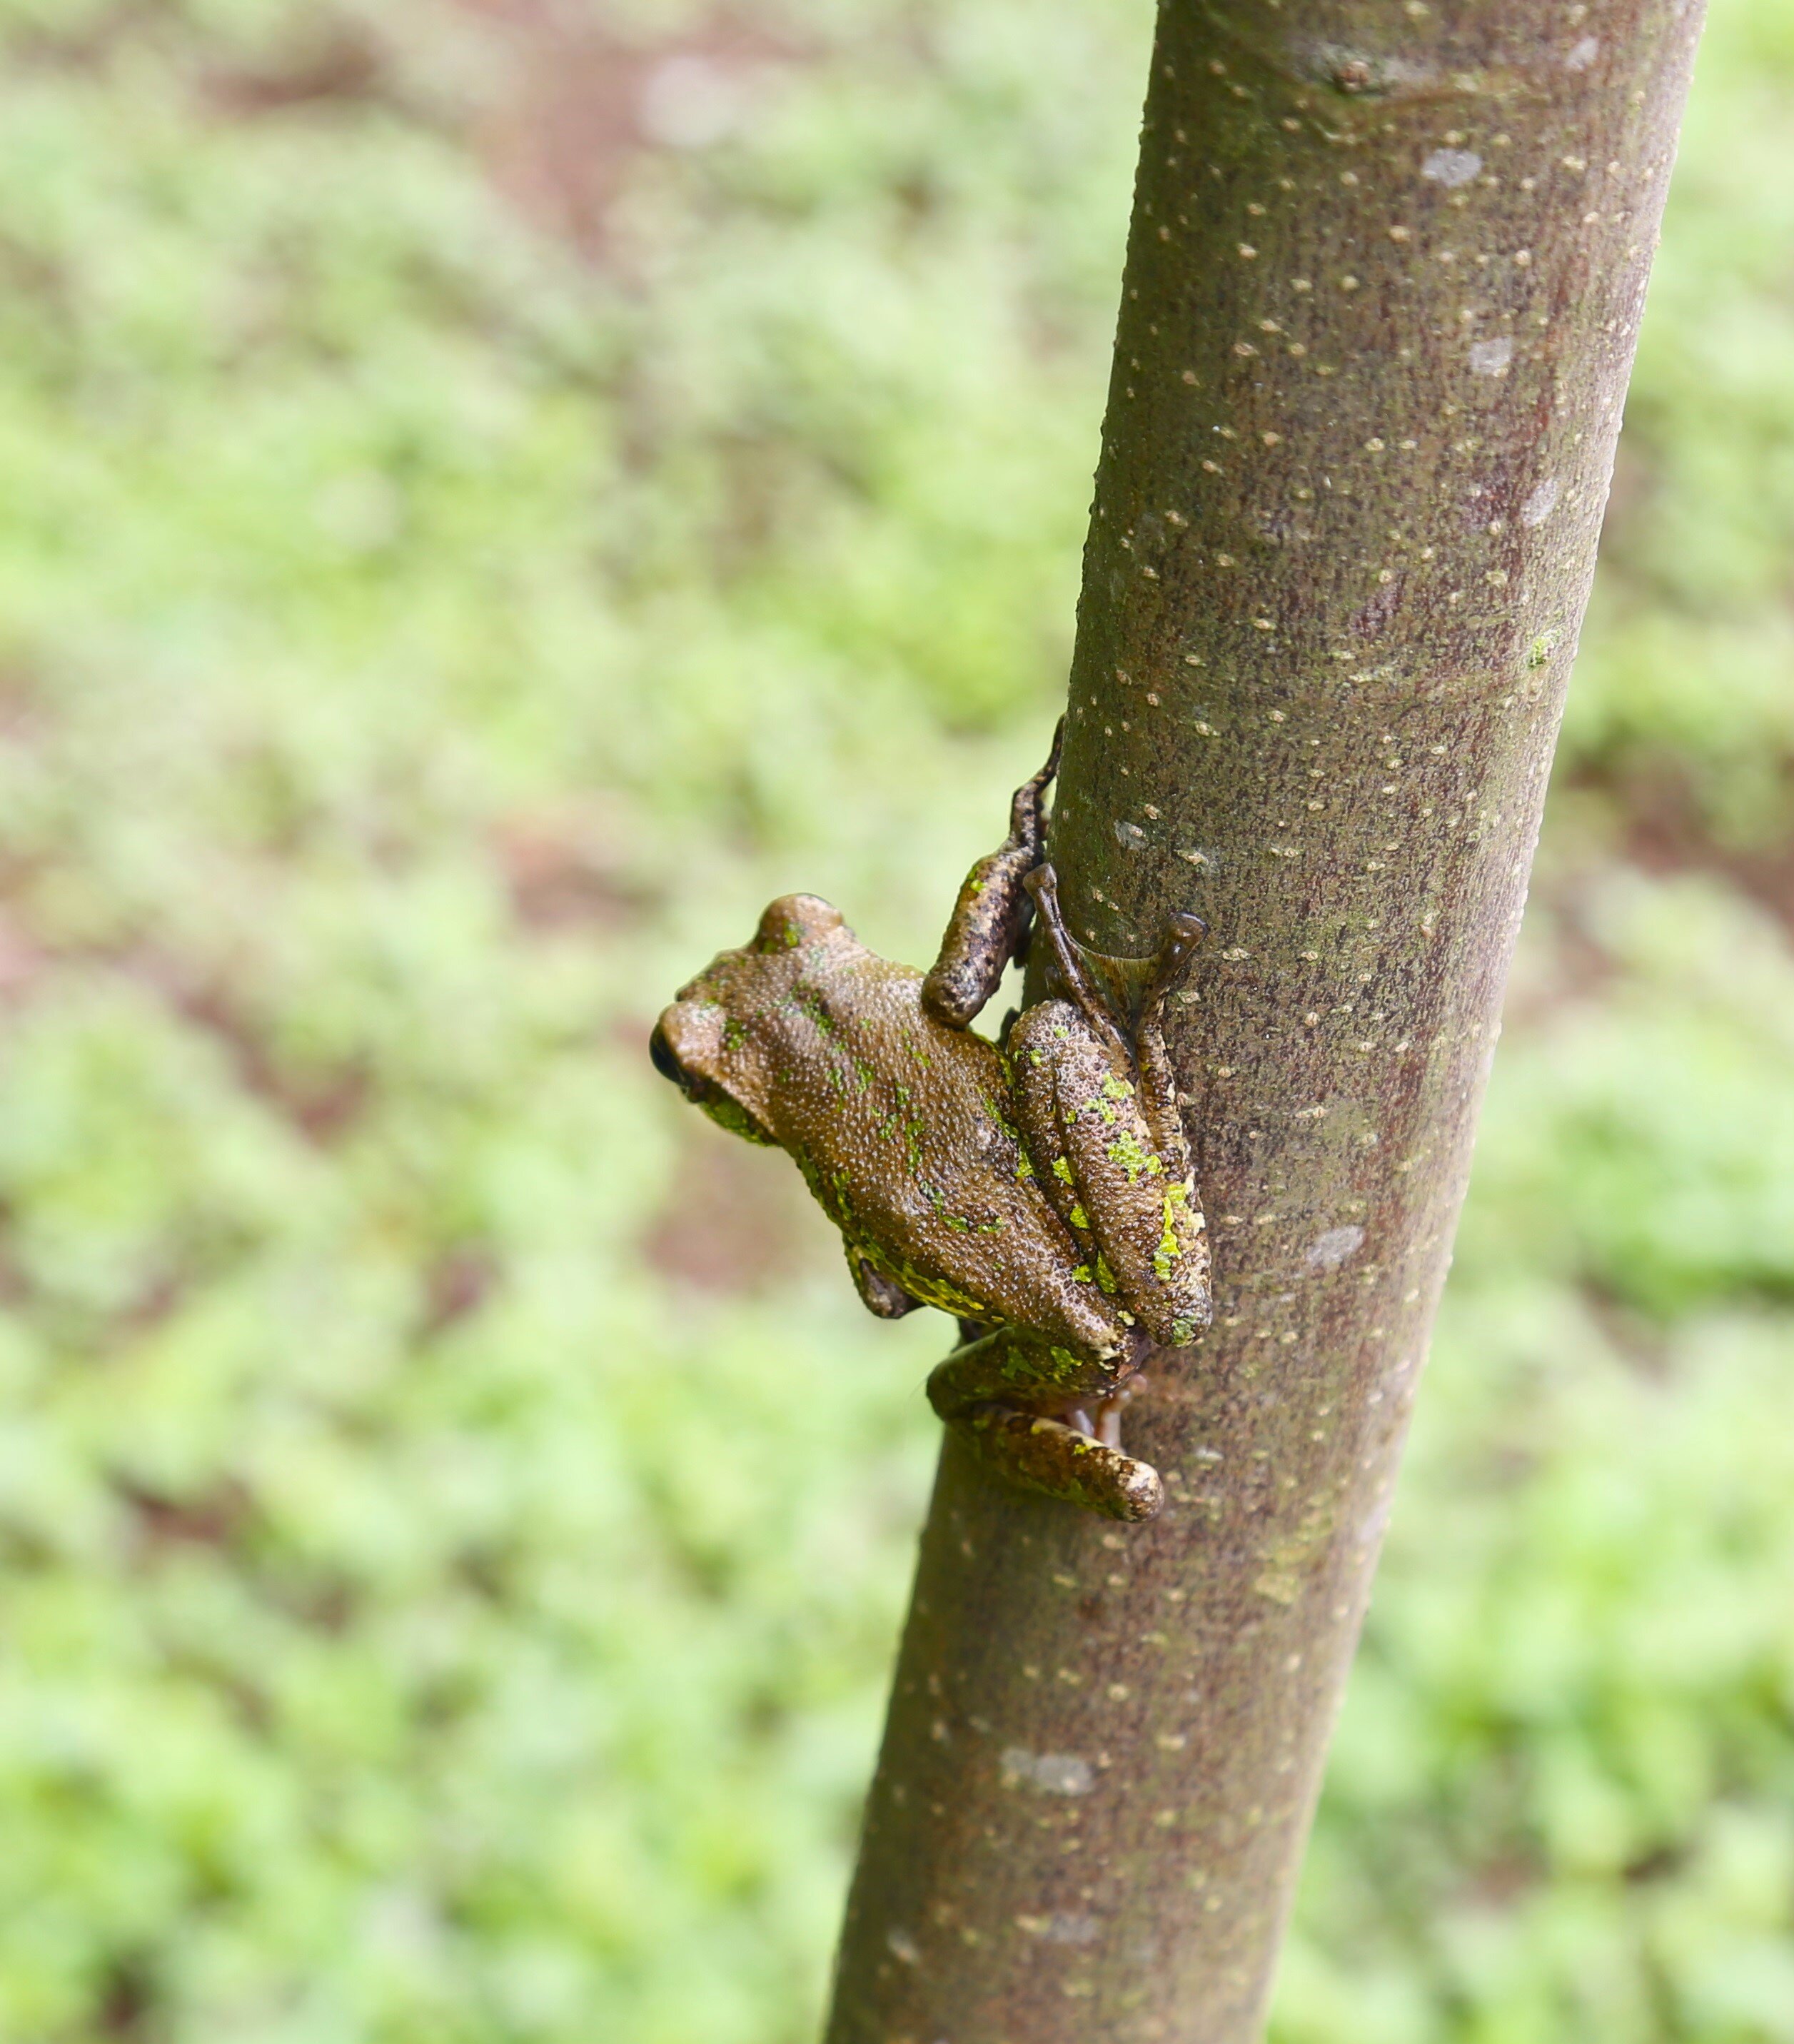 #Frogs use brains or camouflage to evade predators